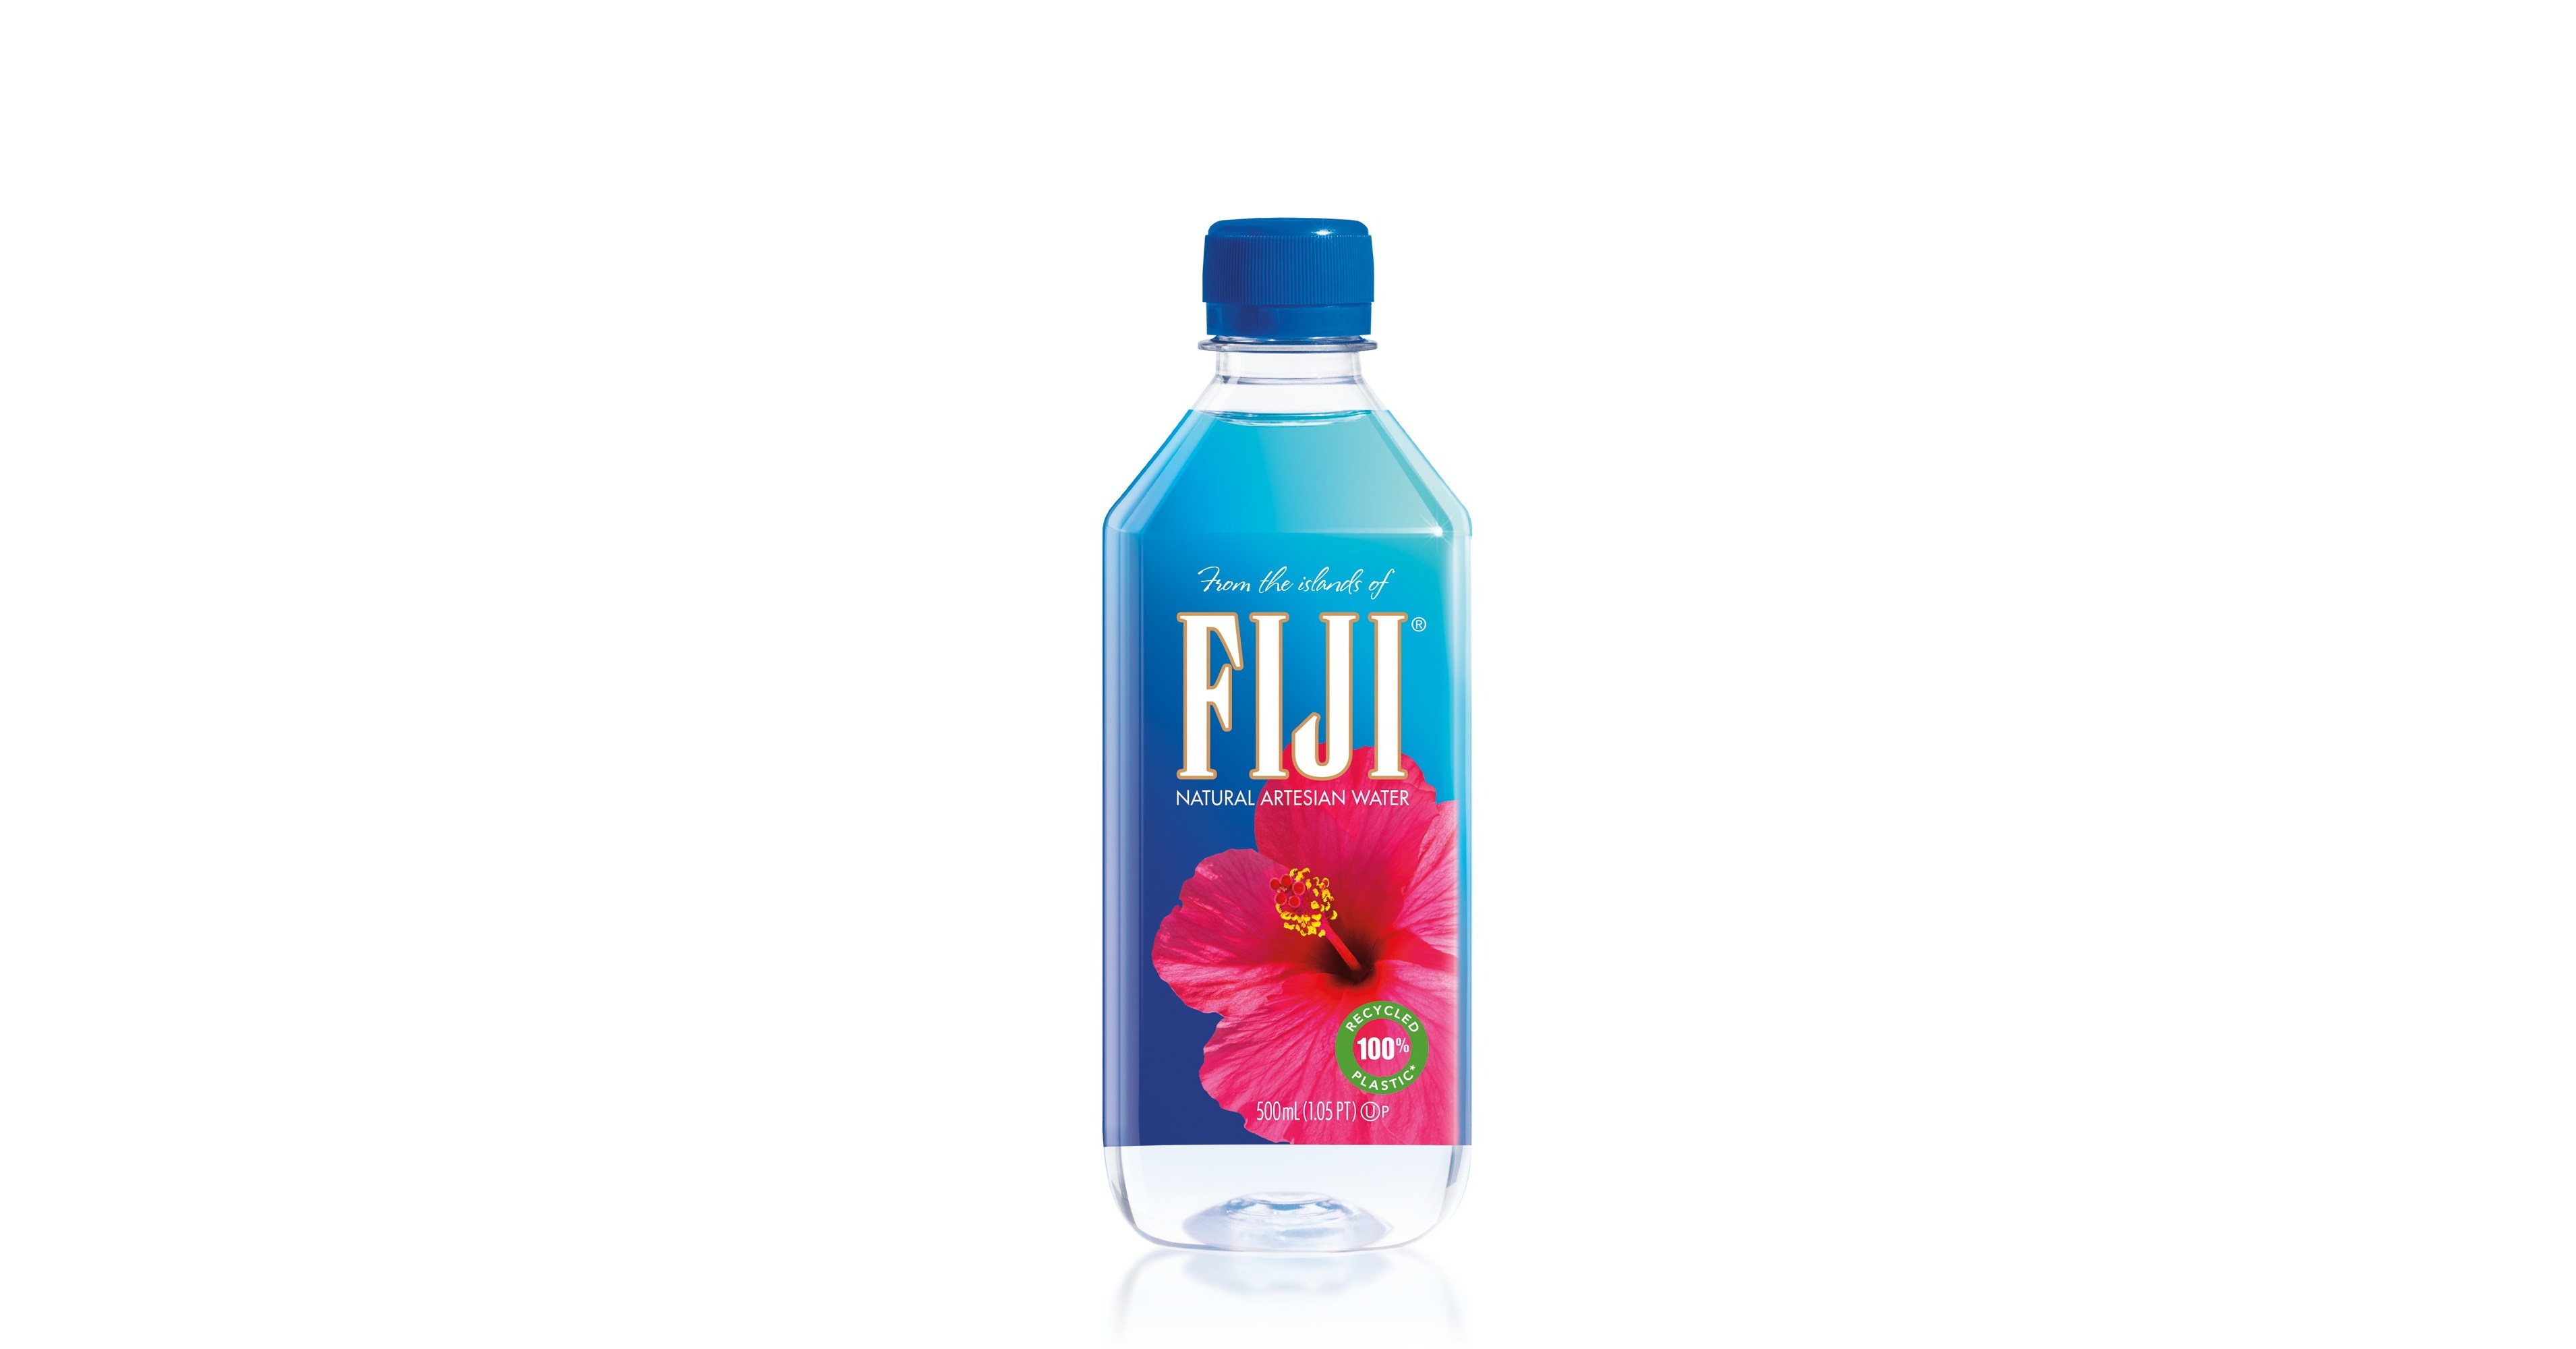 plastic water bottle png